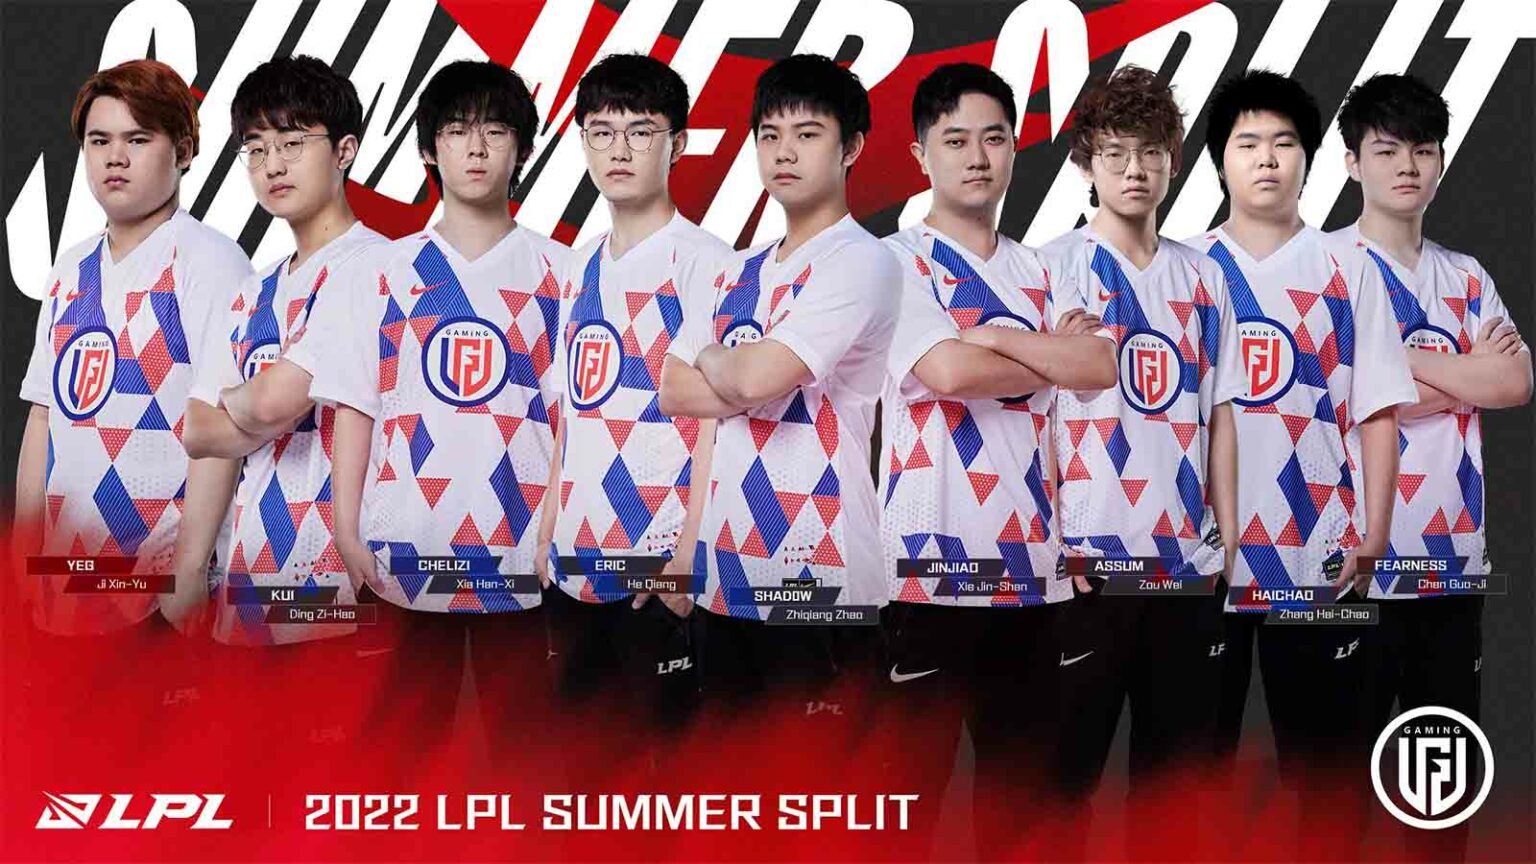 LPL Summer Split 2022 Full roster of every team competing ONE Esports